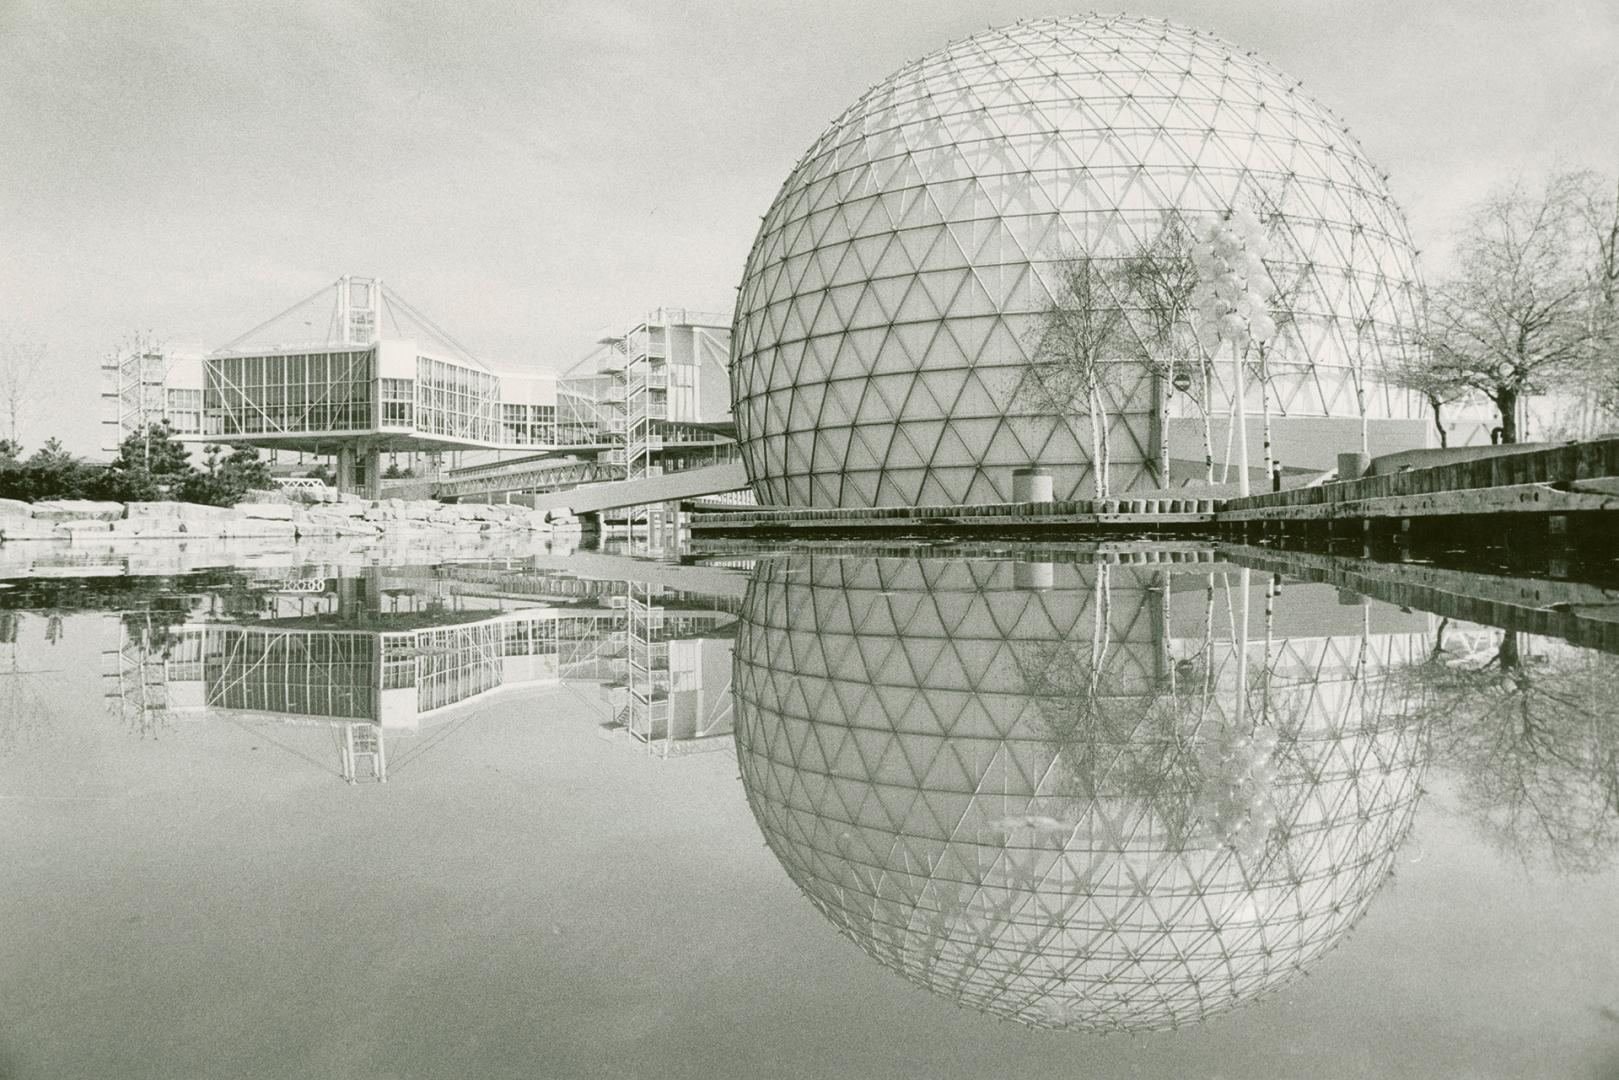 Design focus: At the heart of Ontario Place is the Cinesphere, an 800-seat cinema with an 80-foot-by-60-foot screen